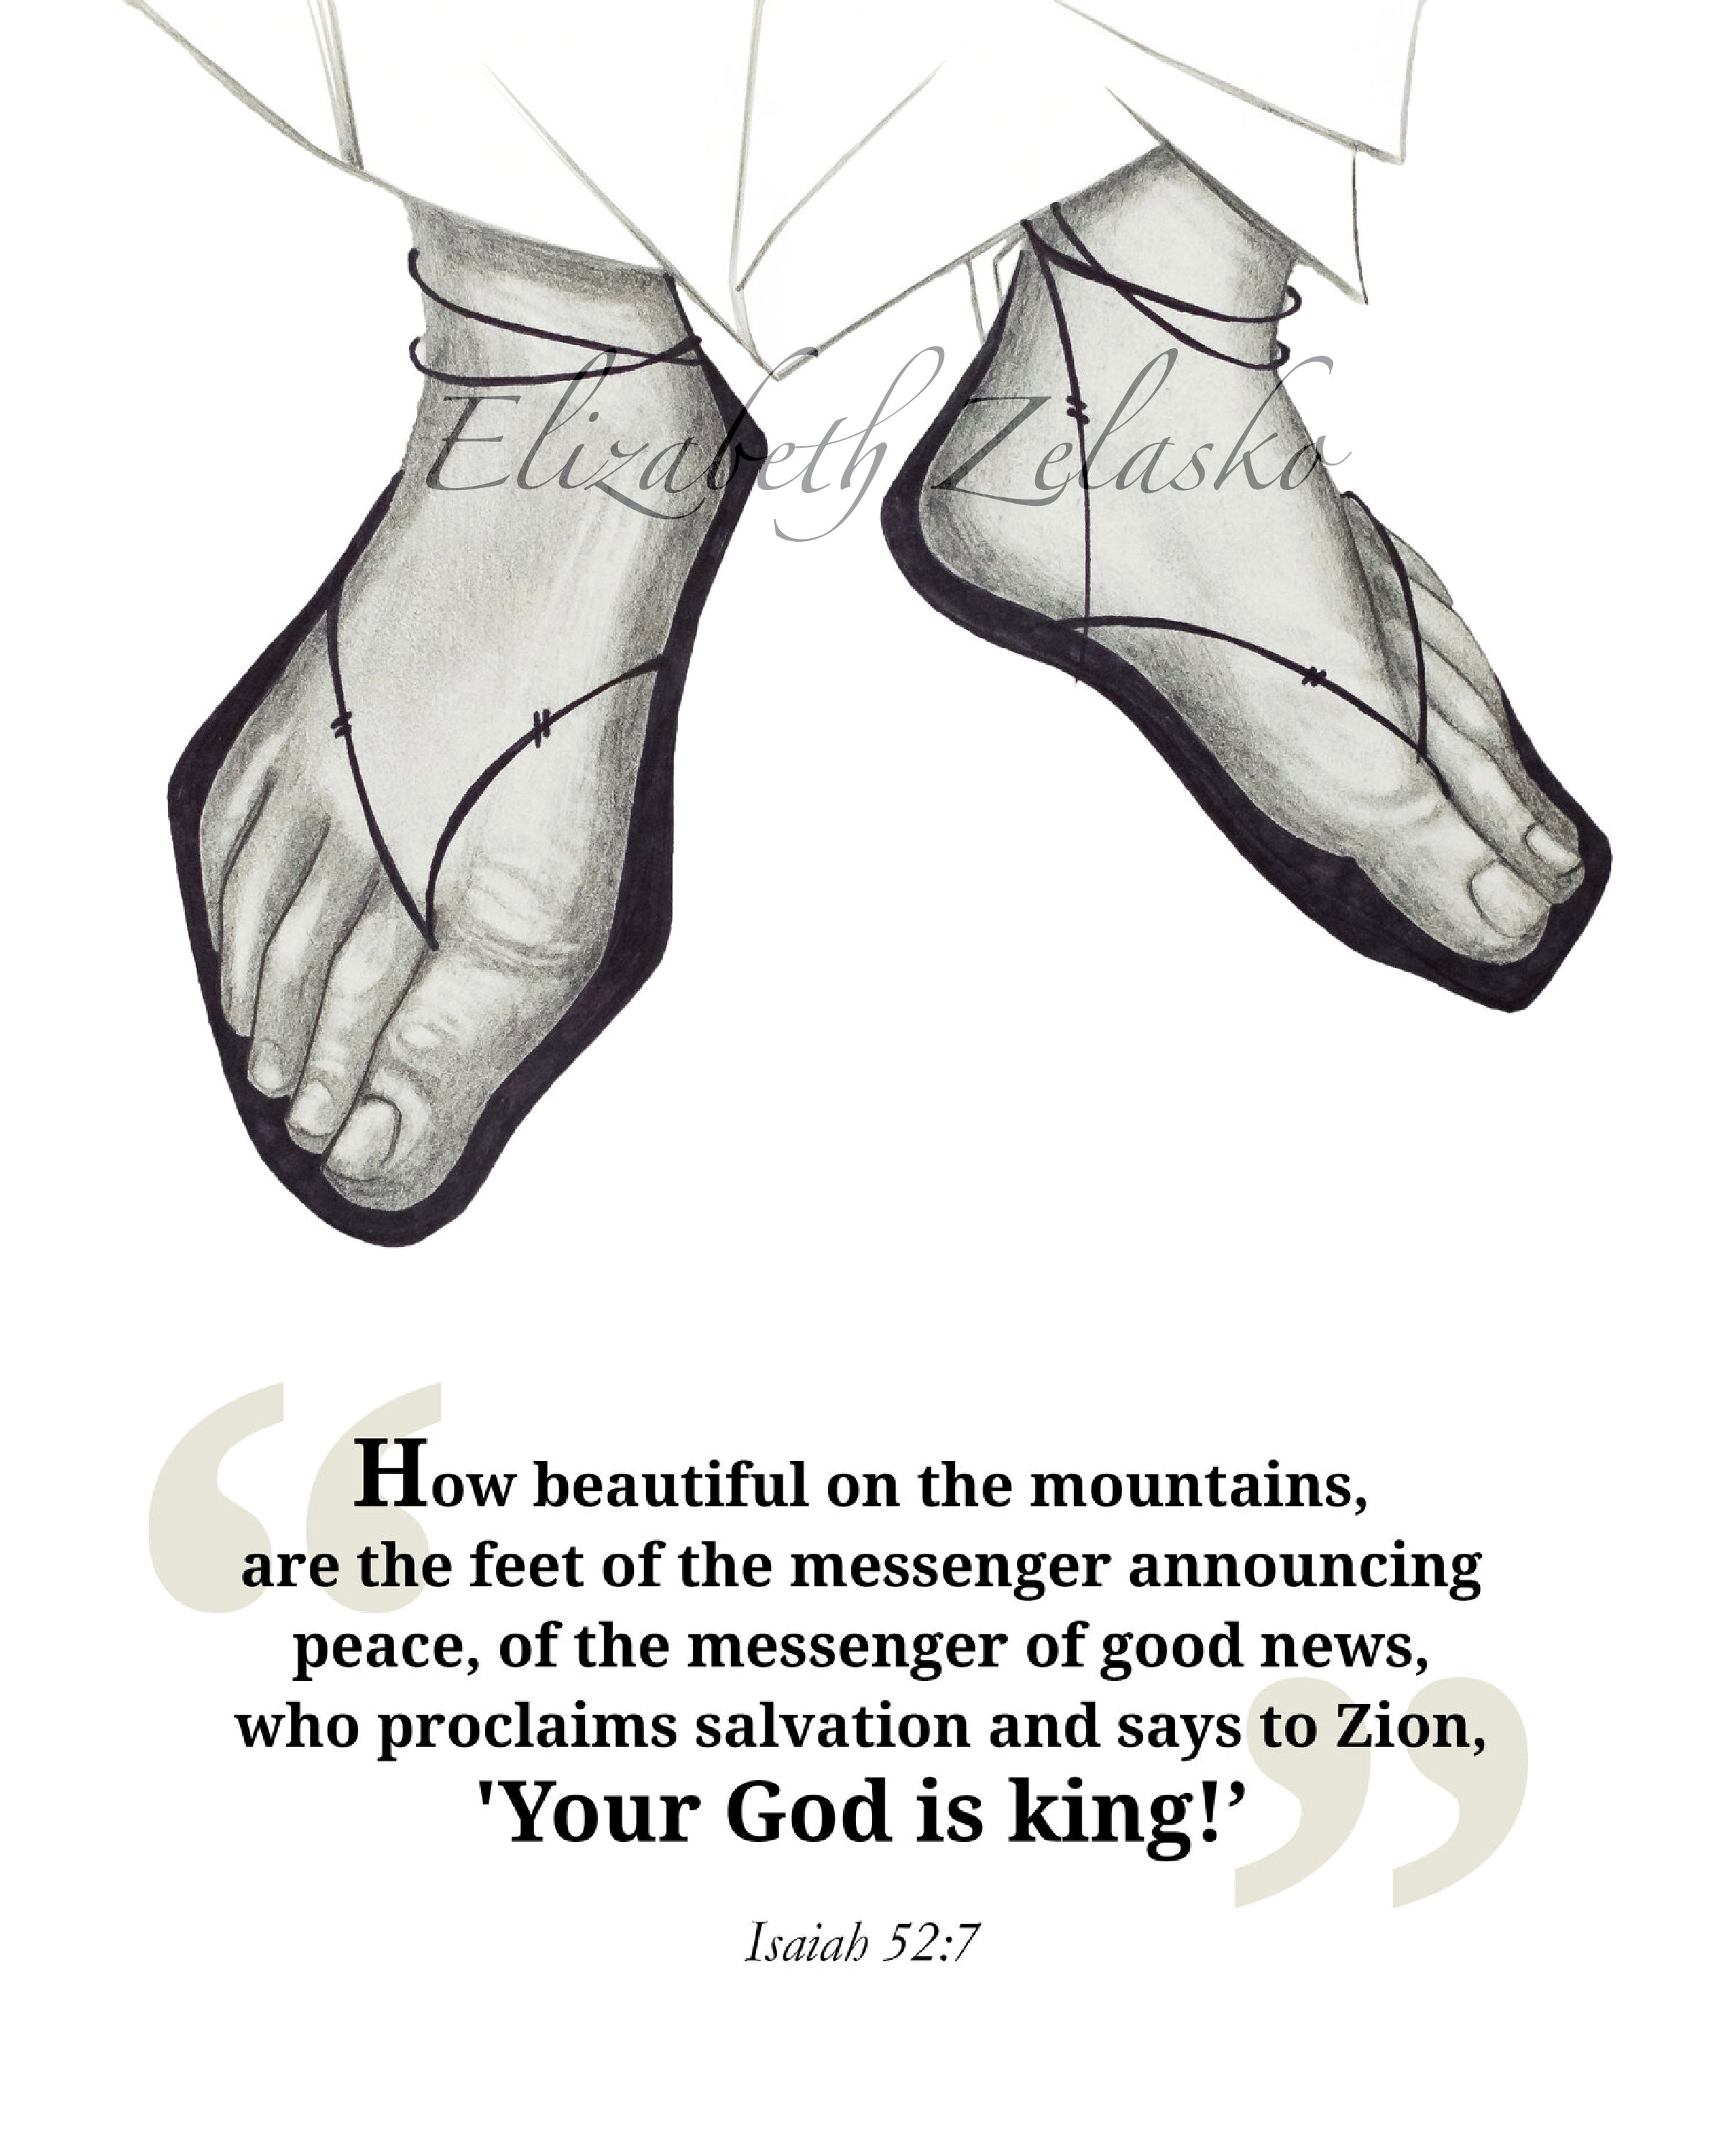 The Feet of the Messenger (with quote)